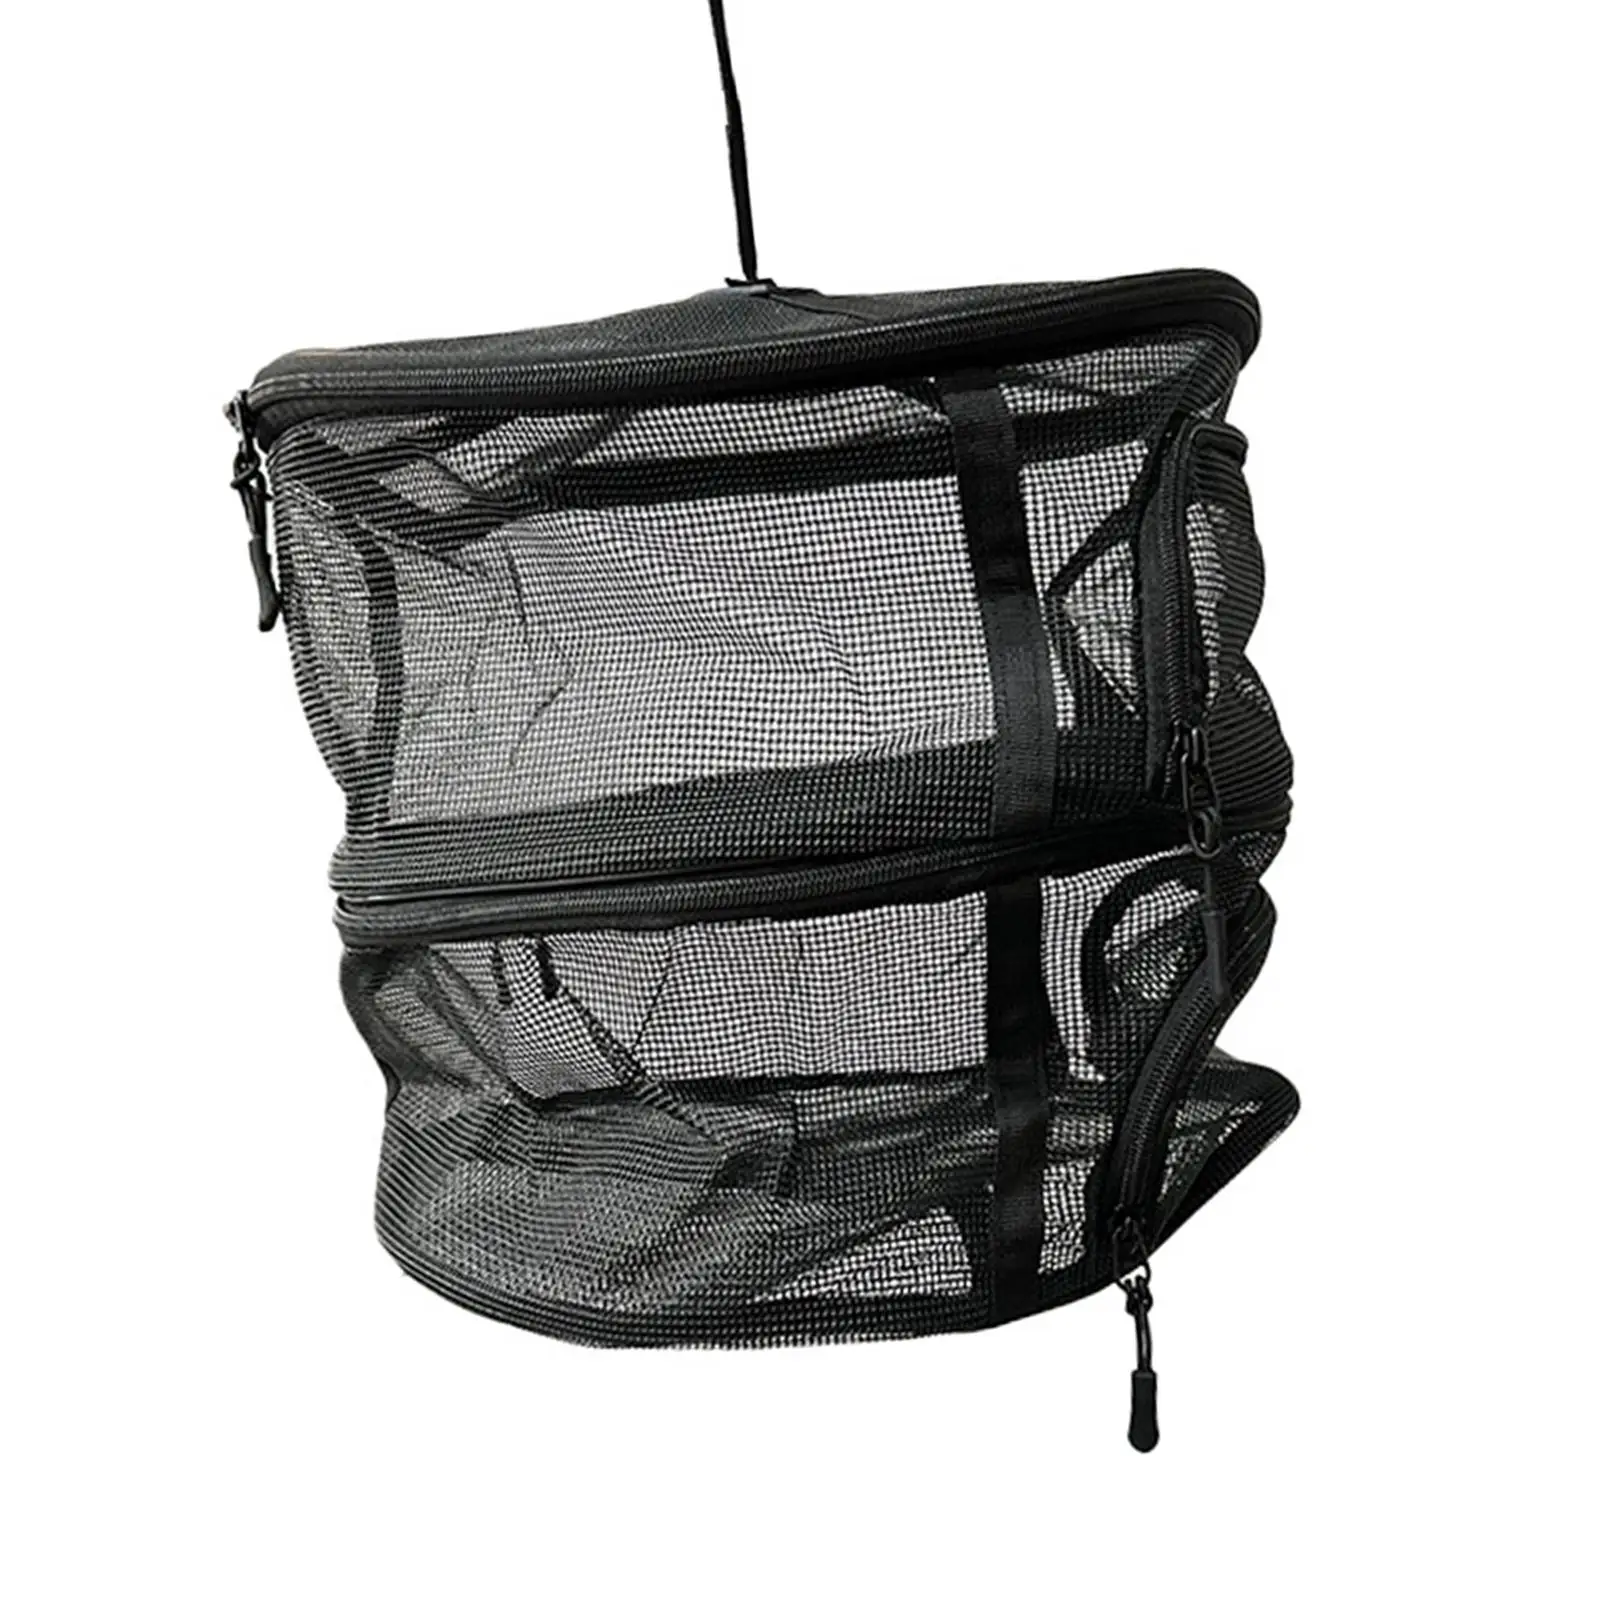 Drying Net Portable Drying Basket for Plants Flowers Buds Fruit Vegetables